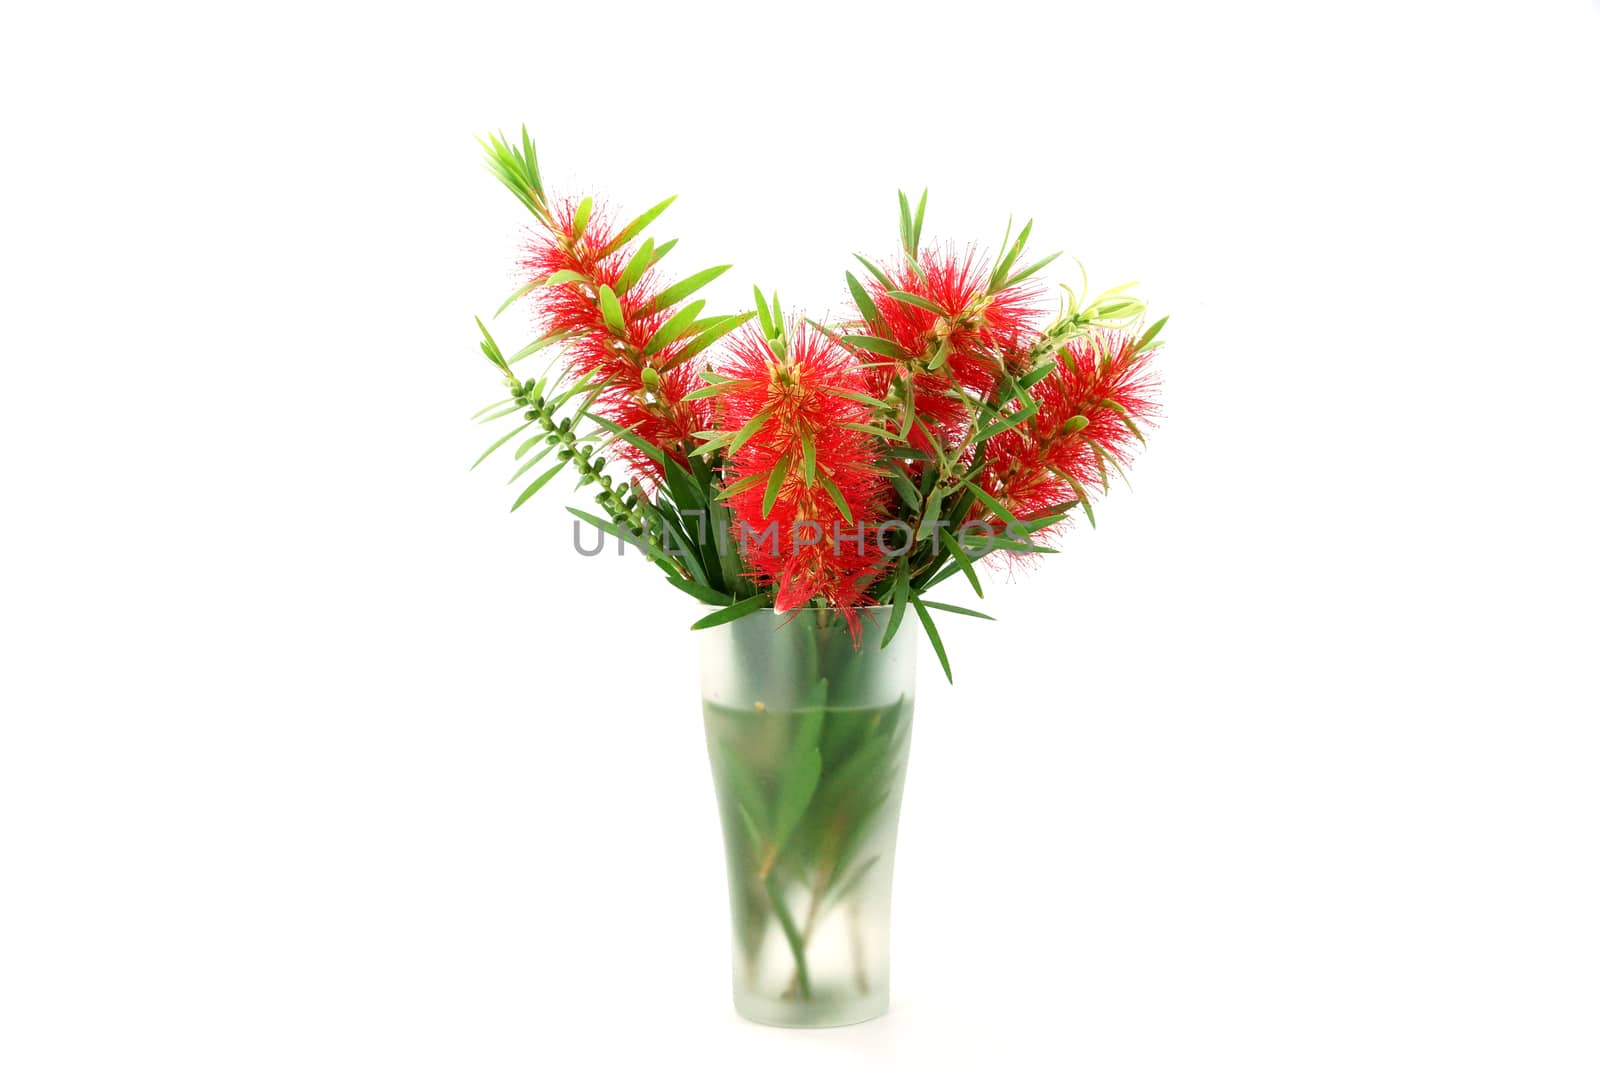 Red bottle brush flower isolated on white background, Scientific by Noppharat_th